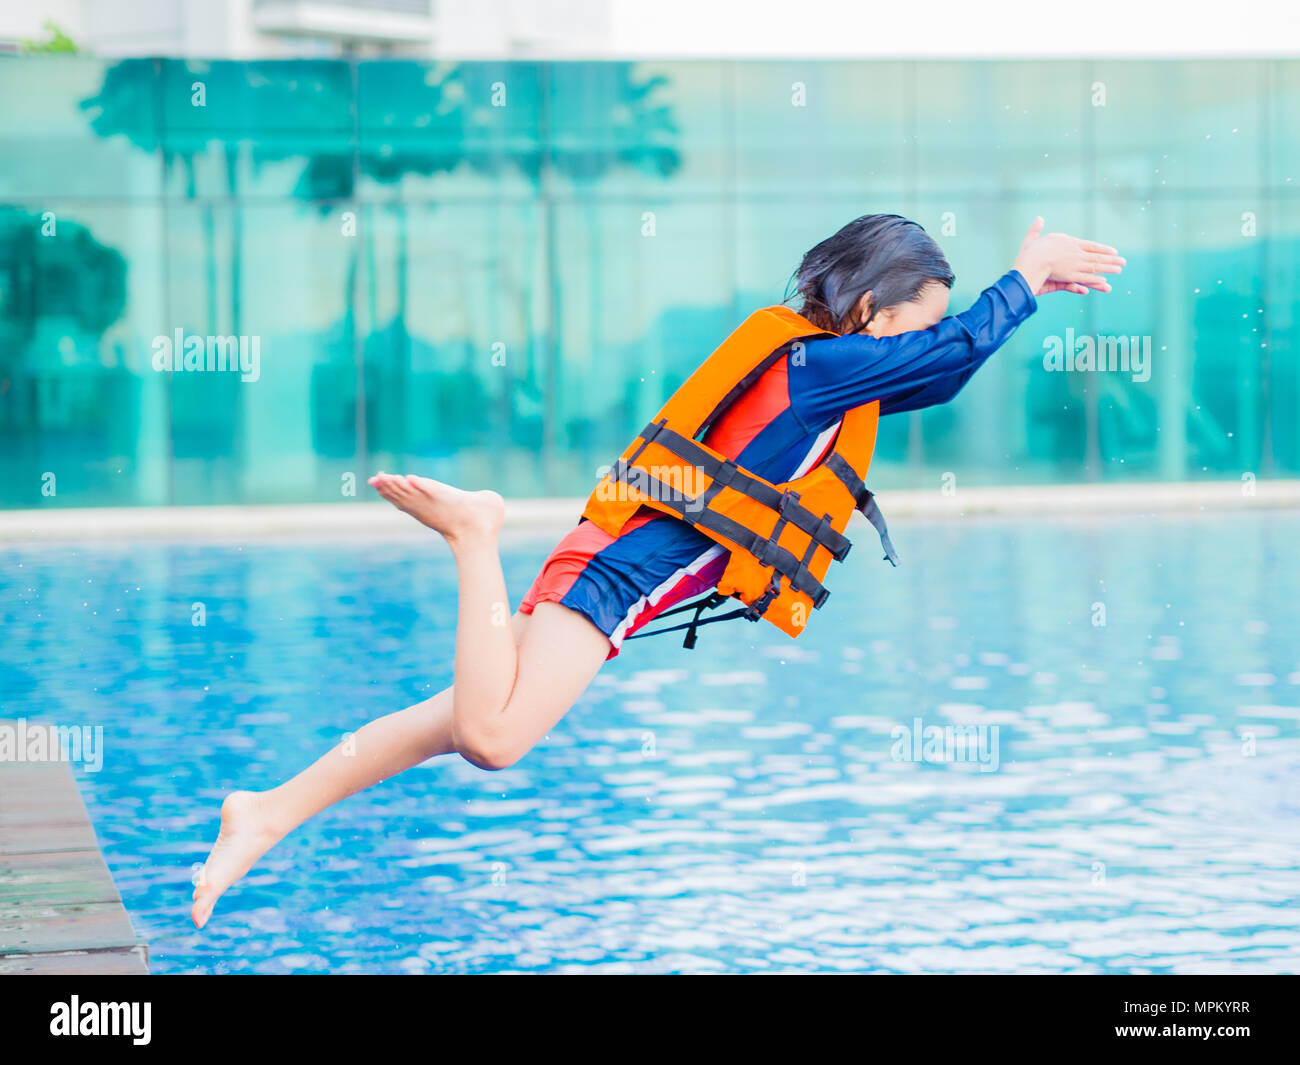 Happy little boy wearing orange life jacket has fun and enjoy jumping in the swimming pool. Focus on boy body. Stock Photo